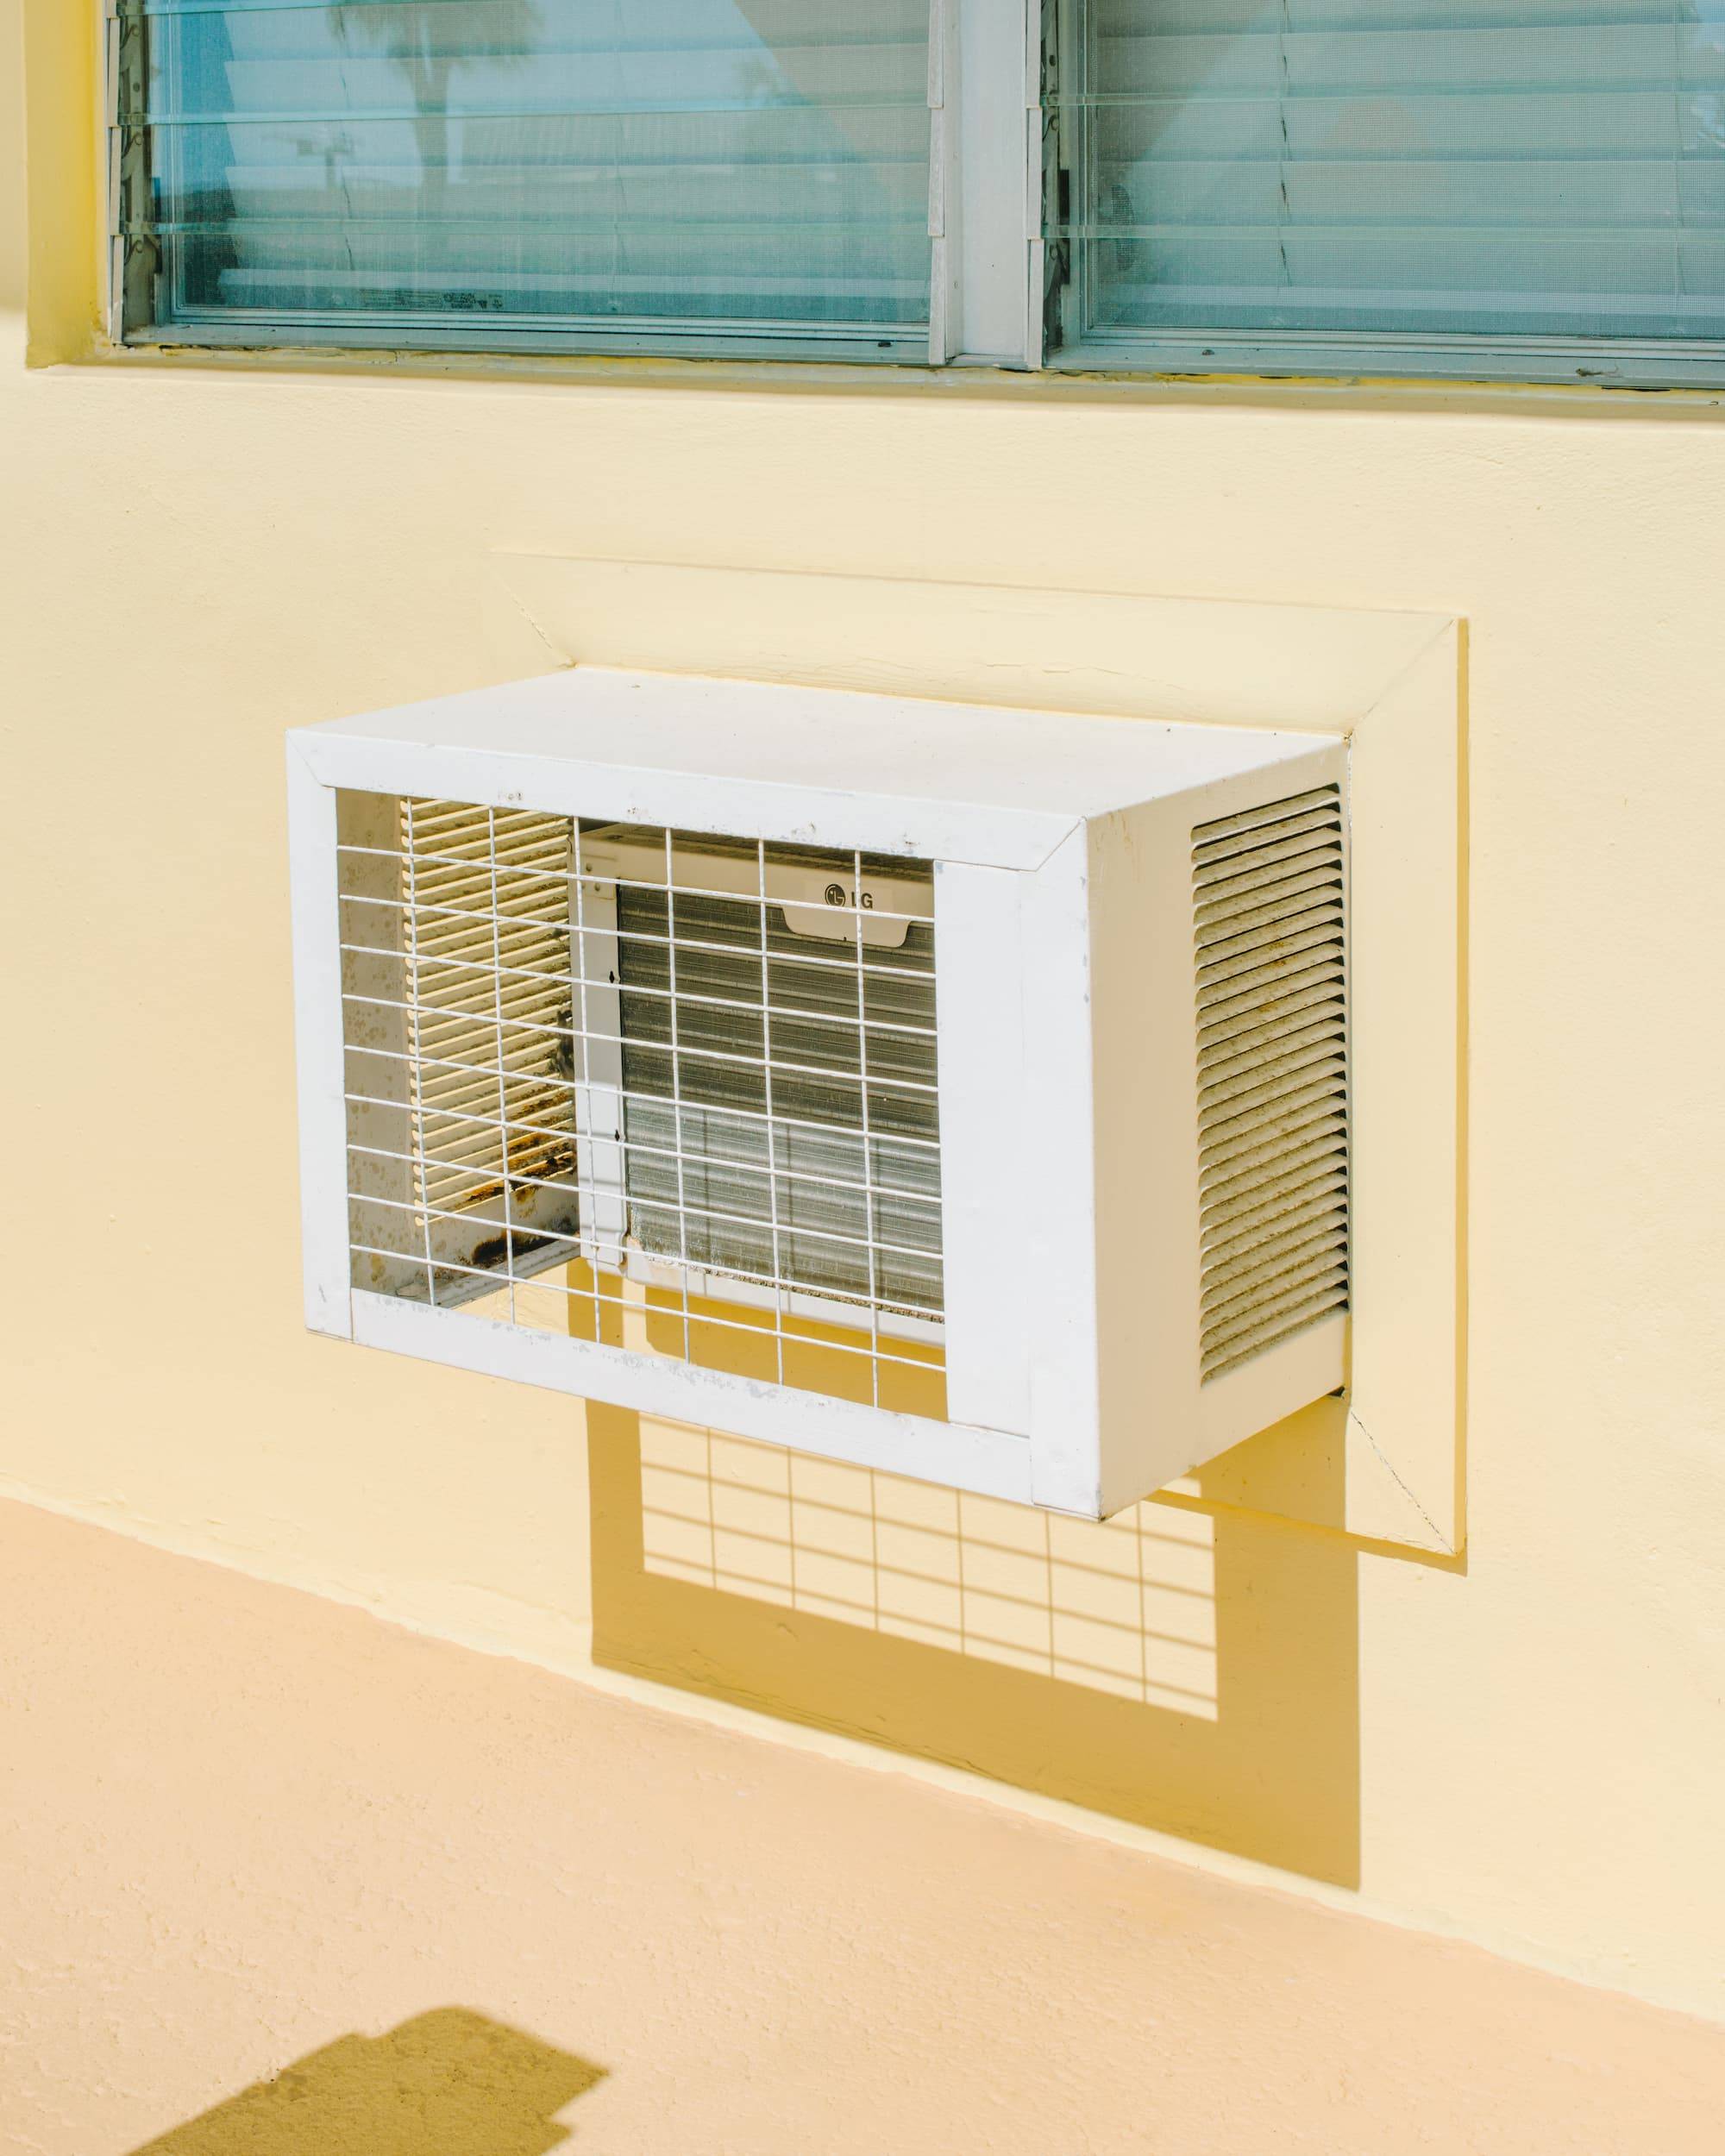 An old air conditioner on a yellow wall